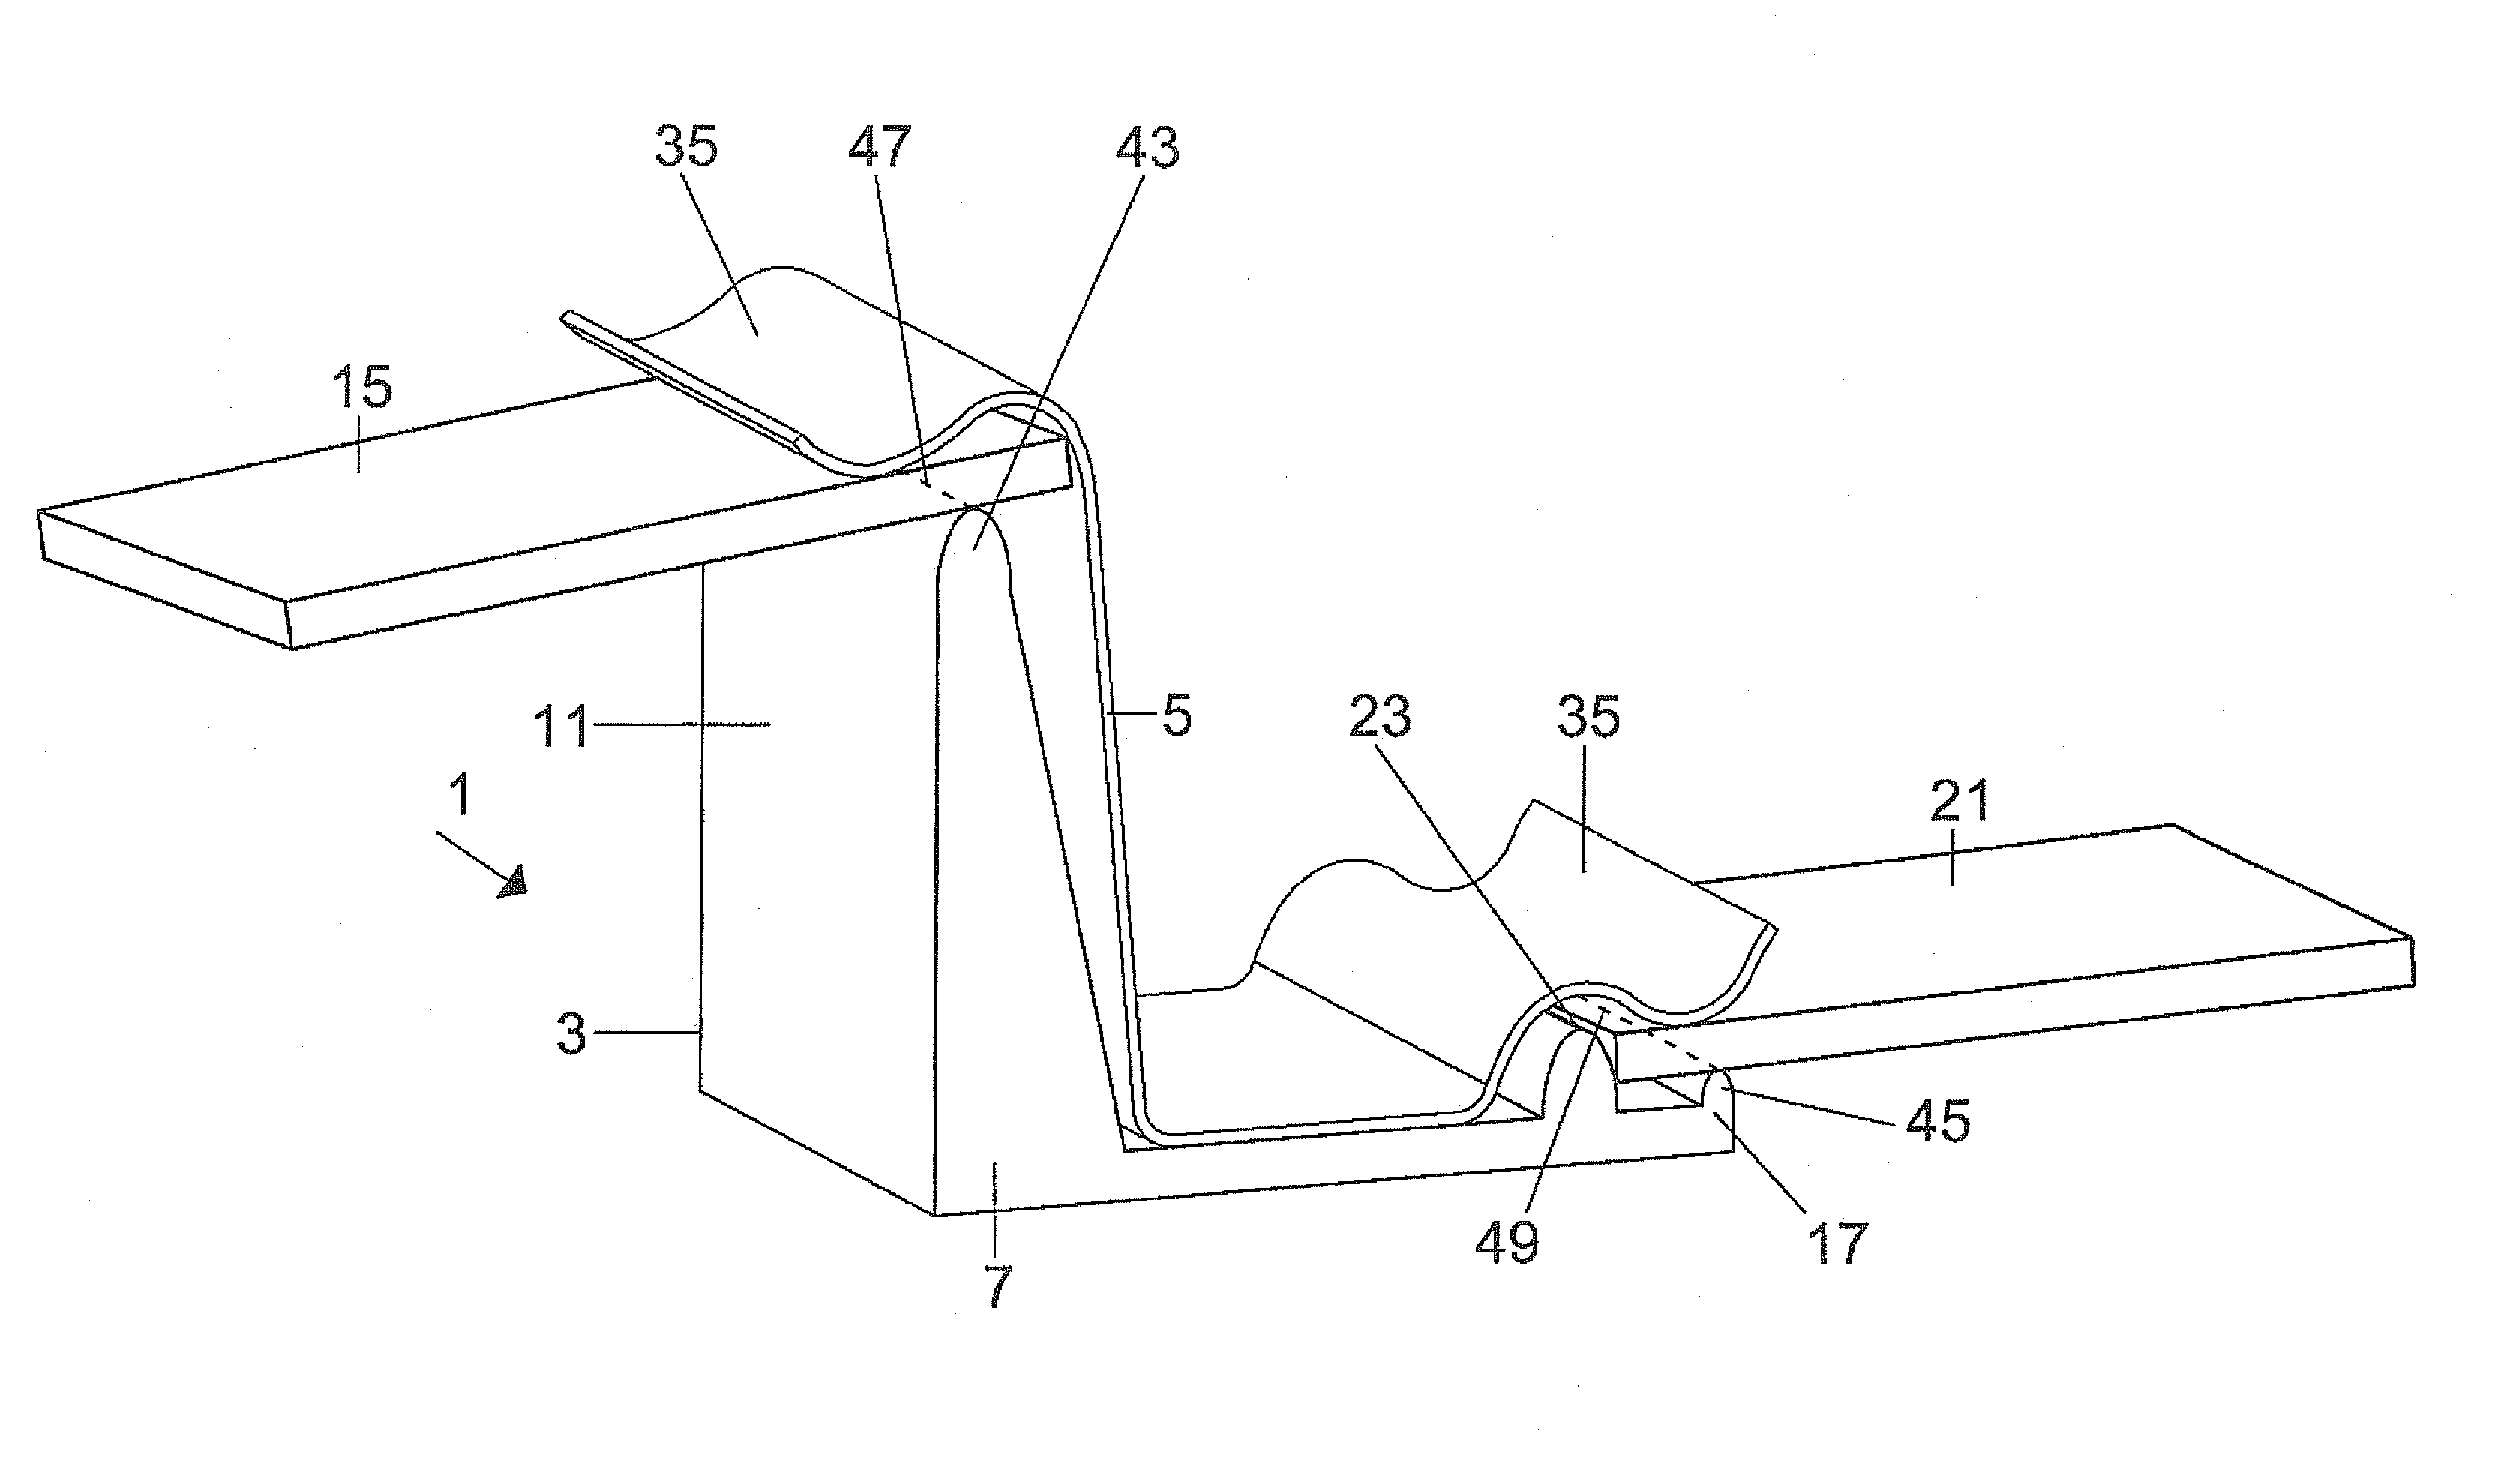 Two-level clamp for photovoltaic modules